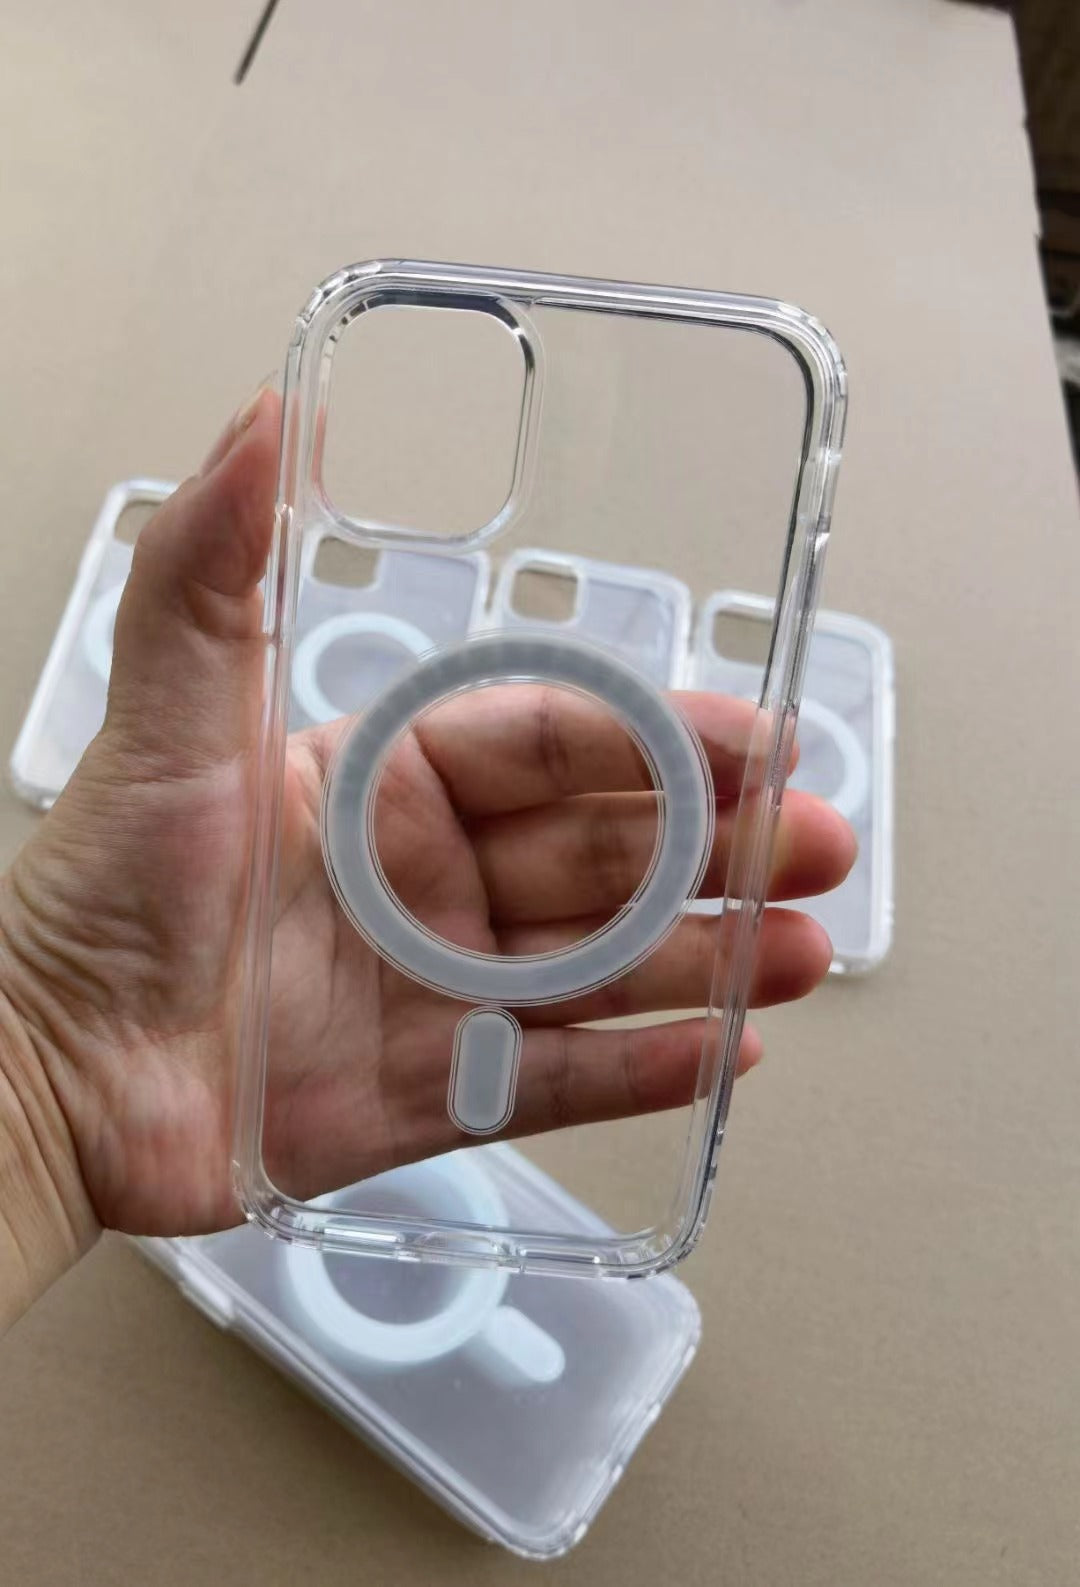 For iPhone 11 Pro Max Clear Case with MagSafe